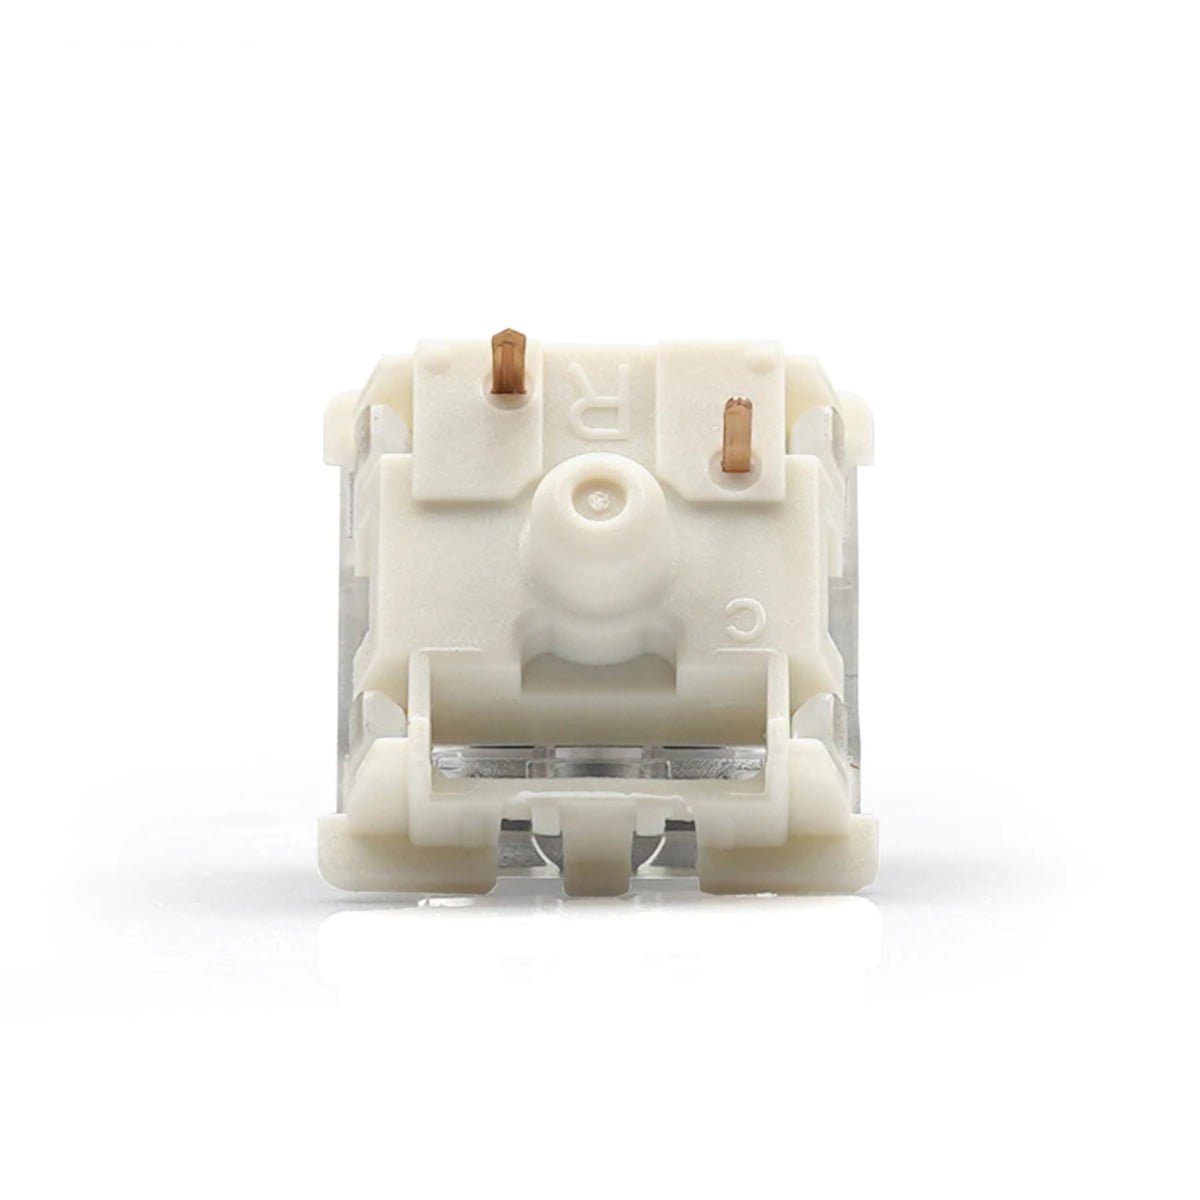 KBD Fans Gateron SMD Tactile Switches - Green - Store 974 | ستور ٩٧٤